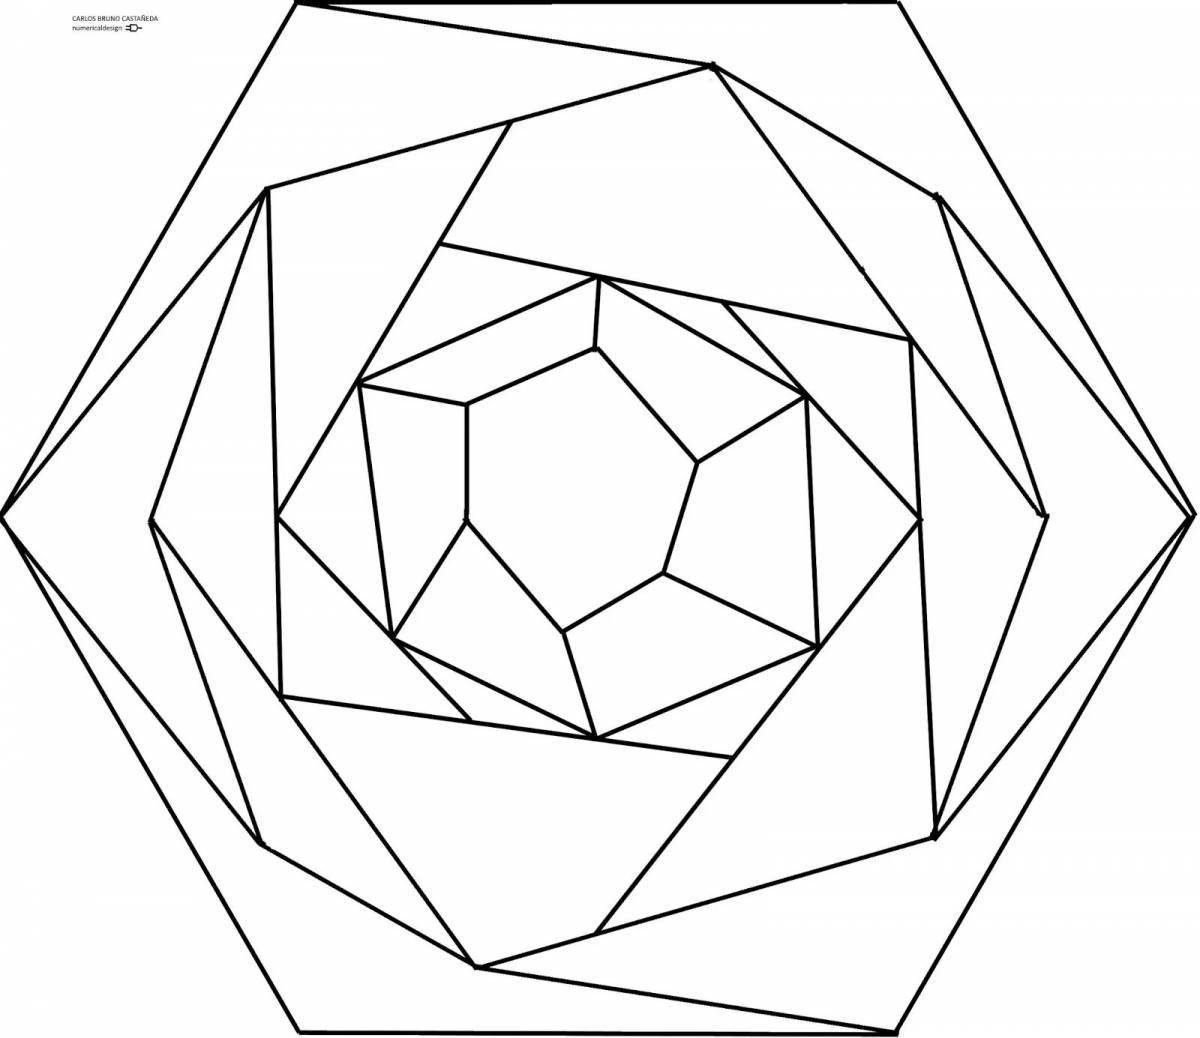 Outstanding geometry coloring page